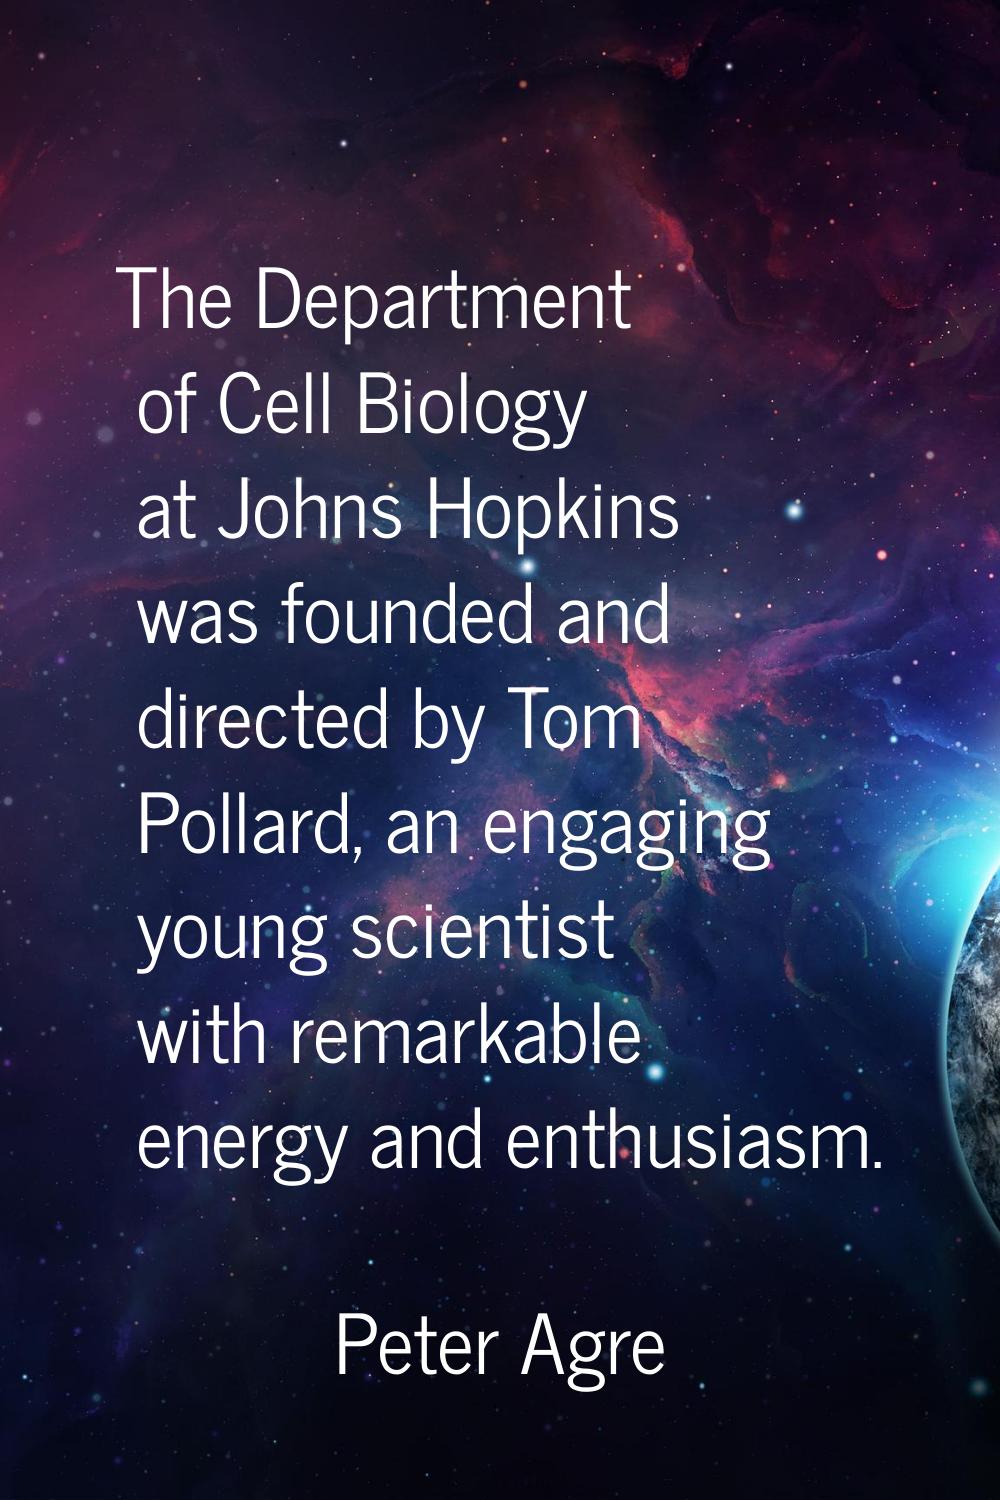 The Department of Cell Biology at Johns Hopkins was founded and directed by Tom Pollard, an engagin